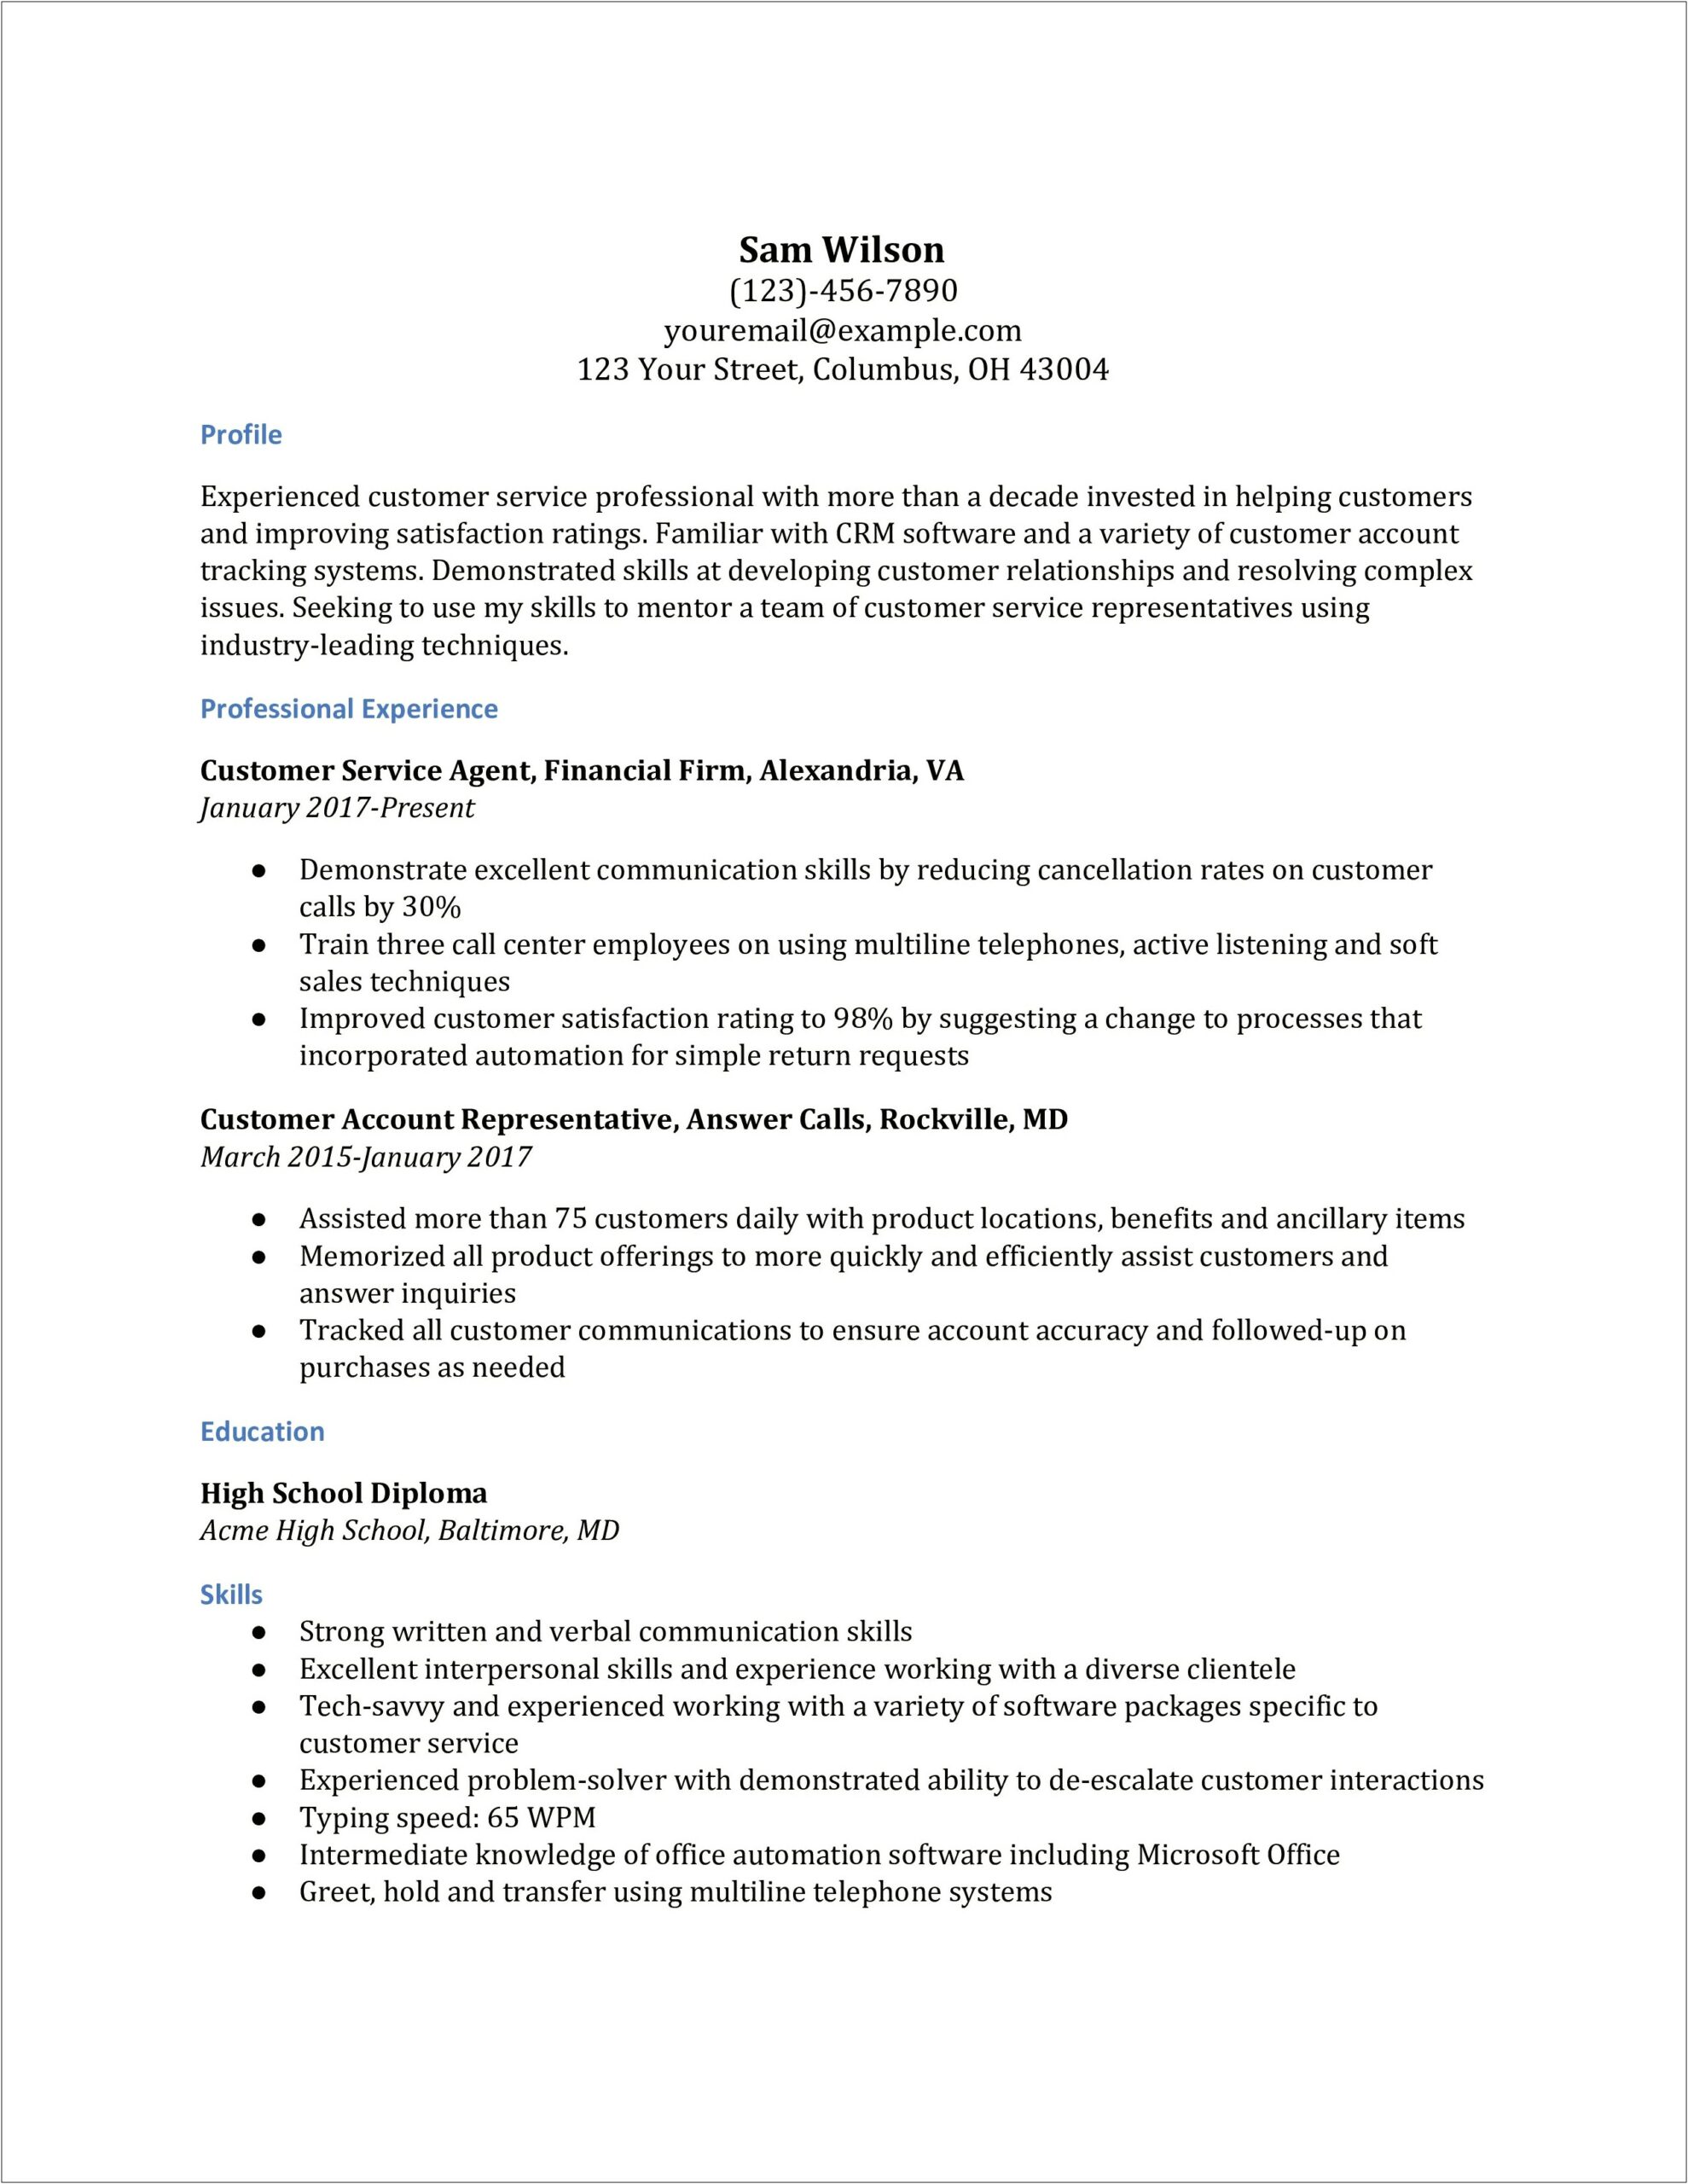 Resume For Someone With Customer Service Experience